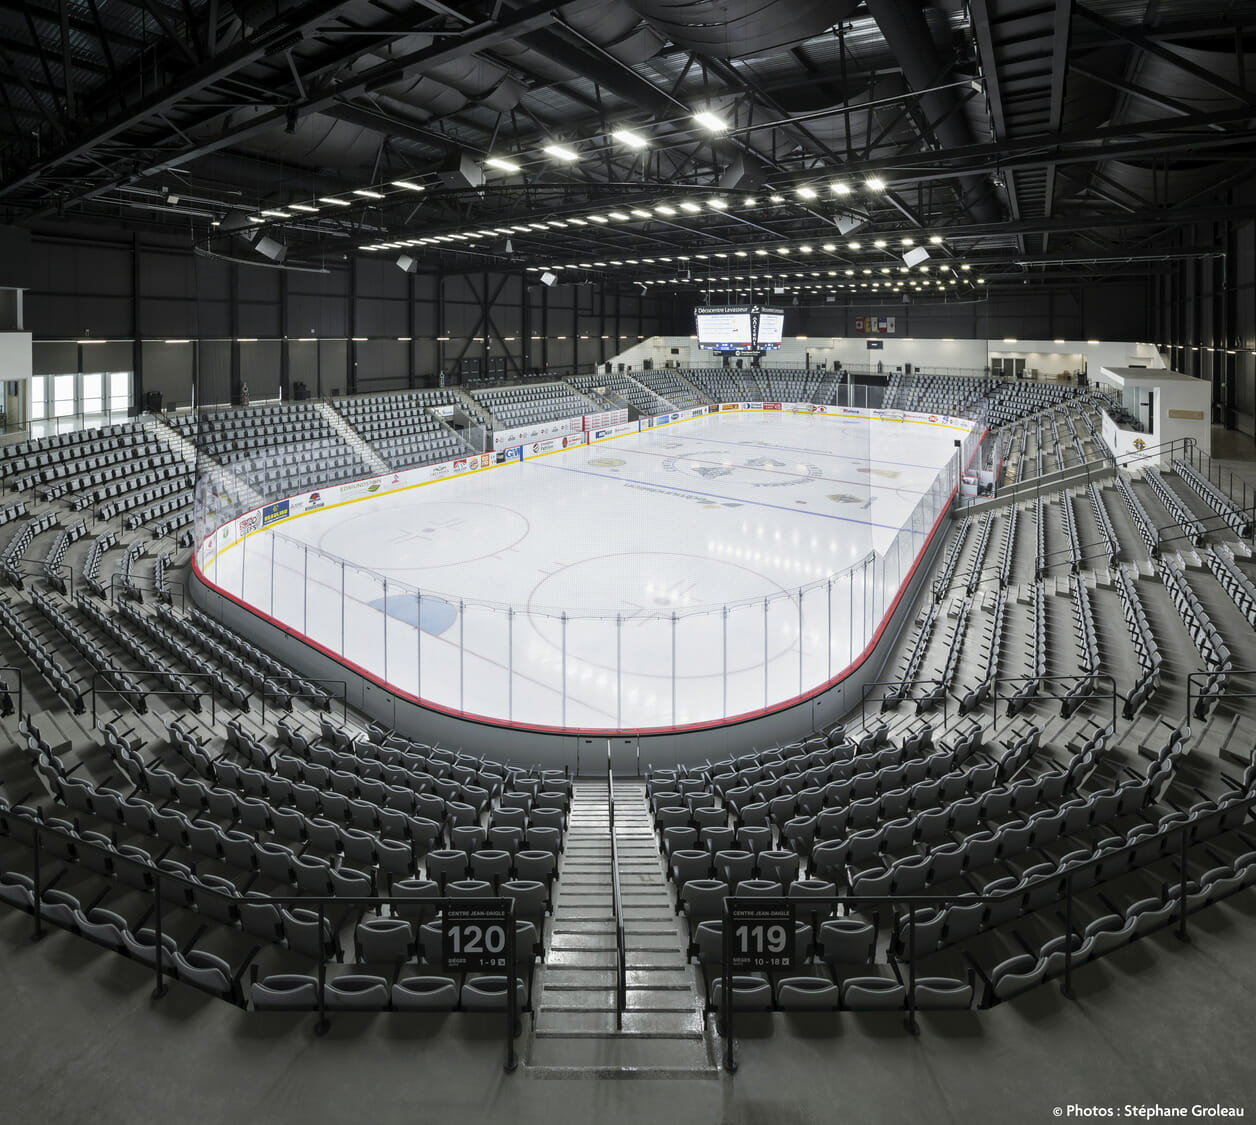 The inside of a hockey arena with empty seats.